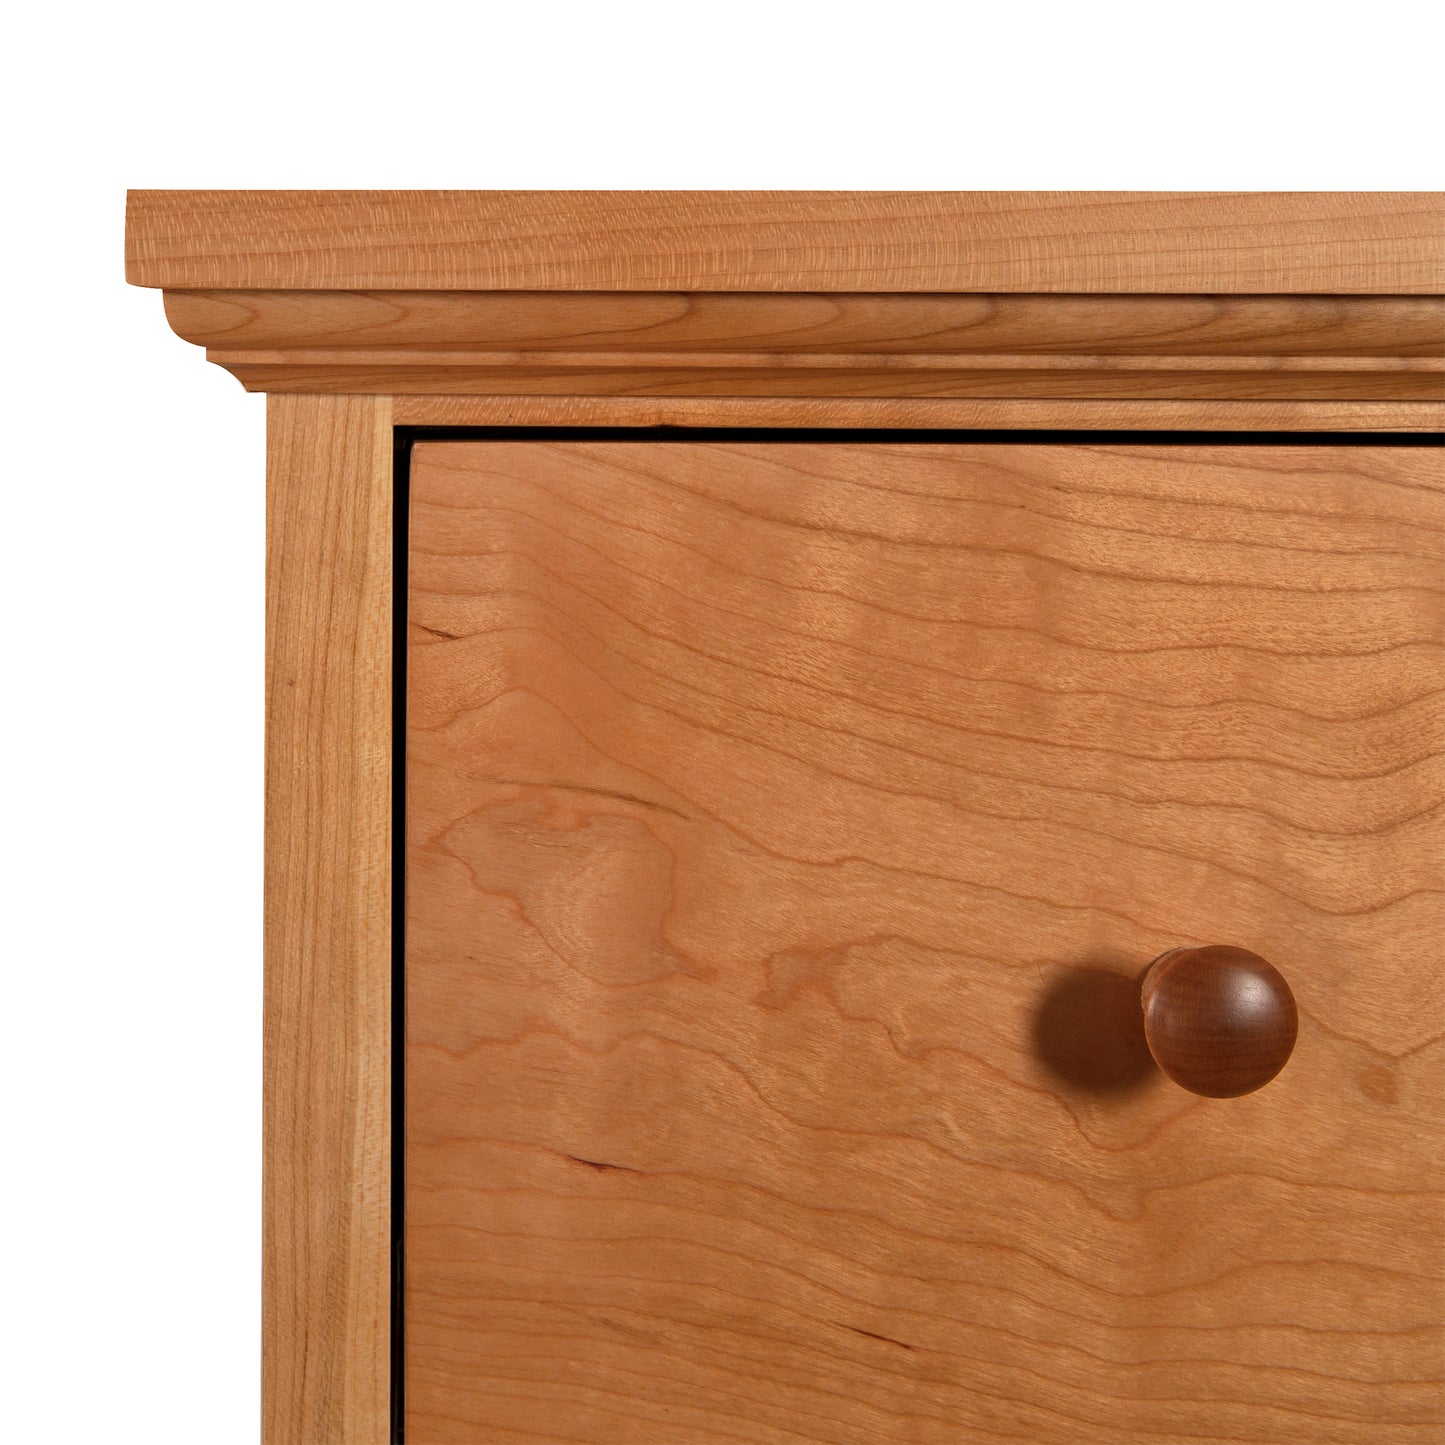 A close up of a Lyndon Furniture American Country 5-Drawer Chest with a knob.